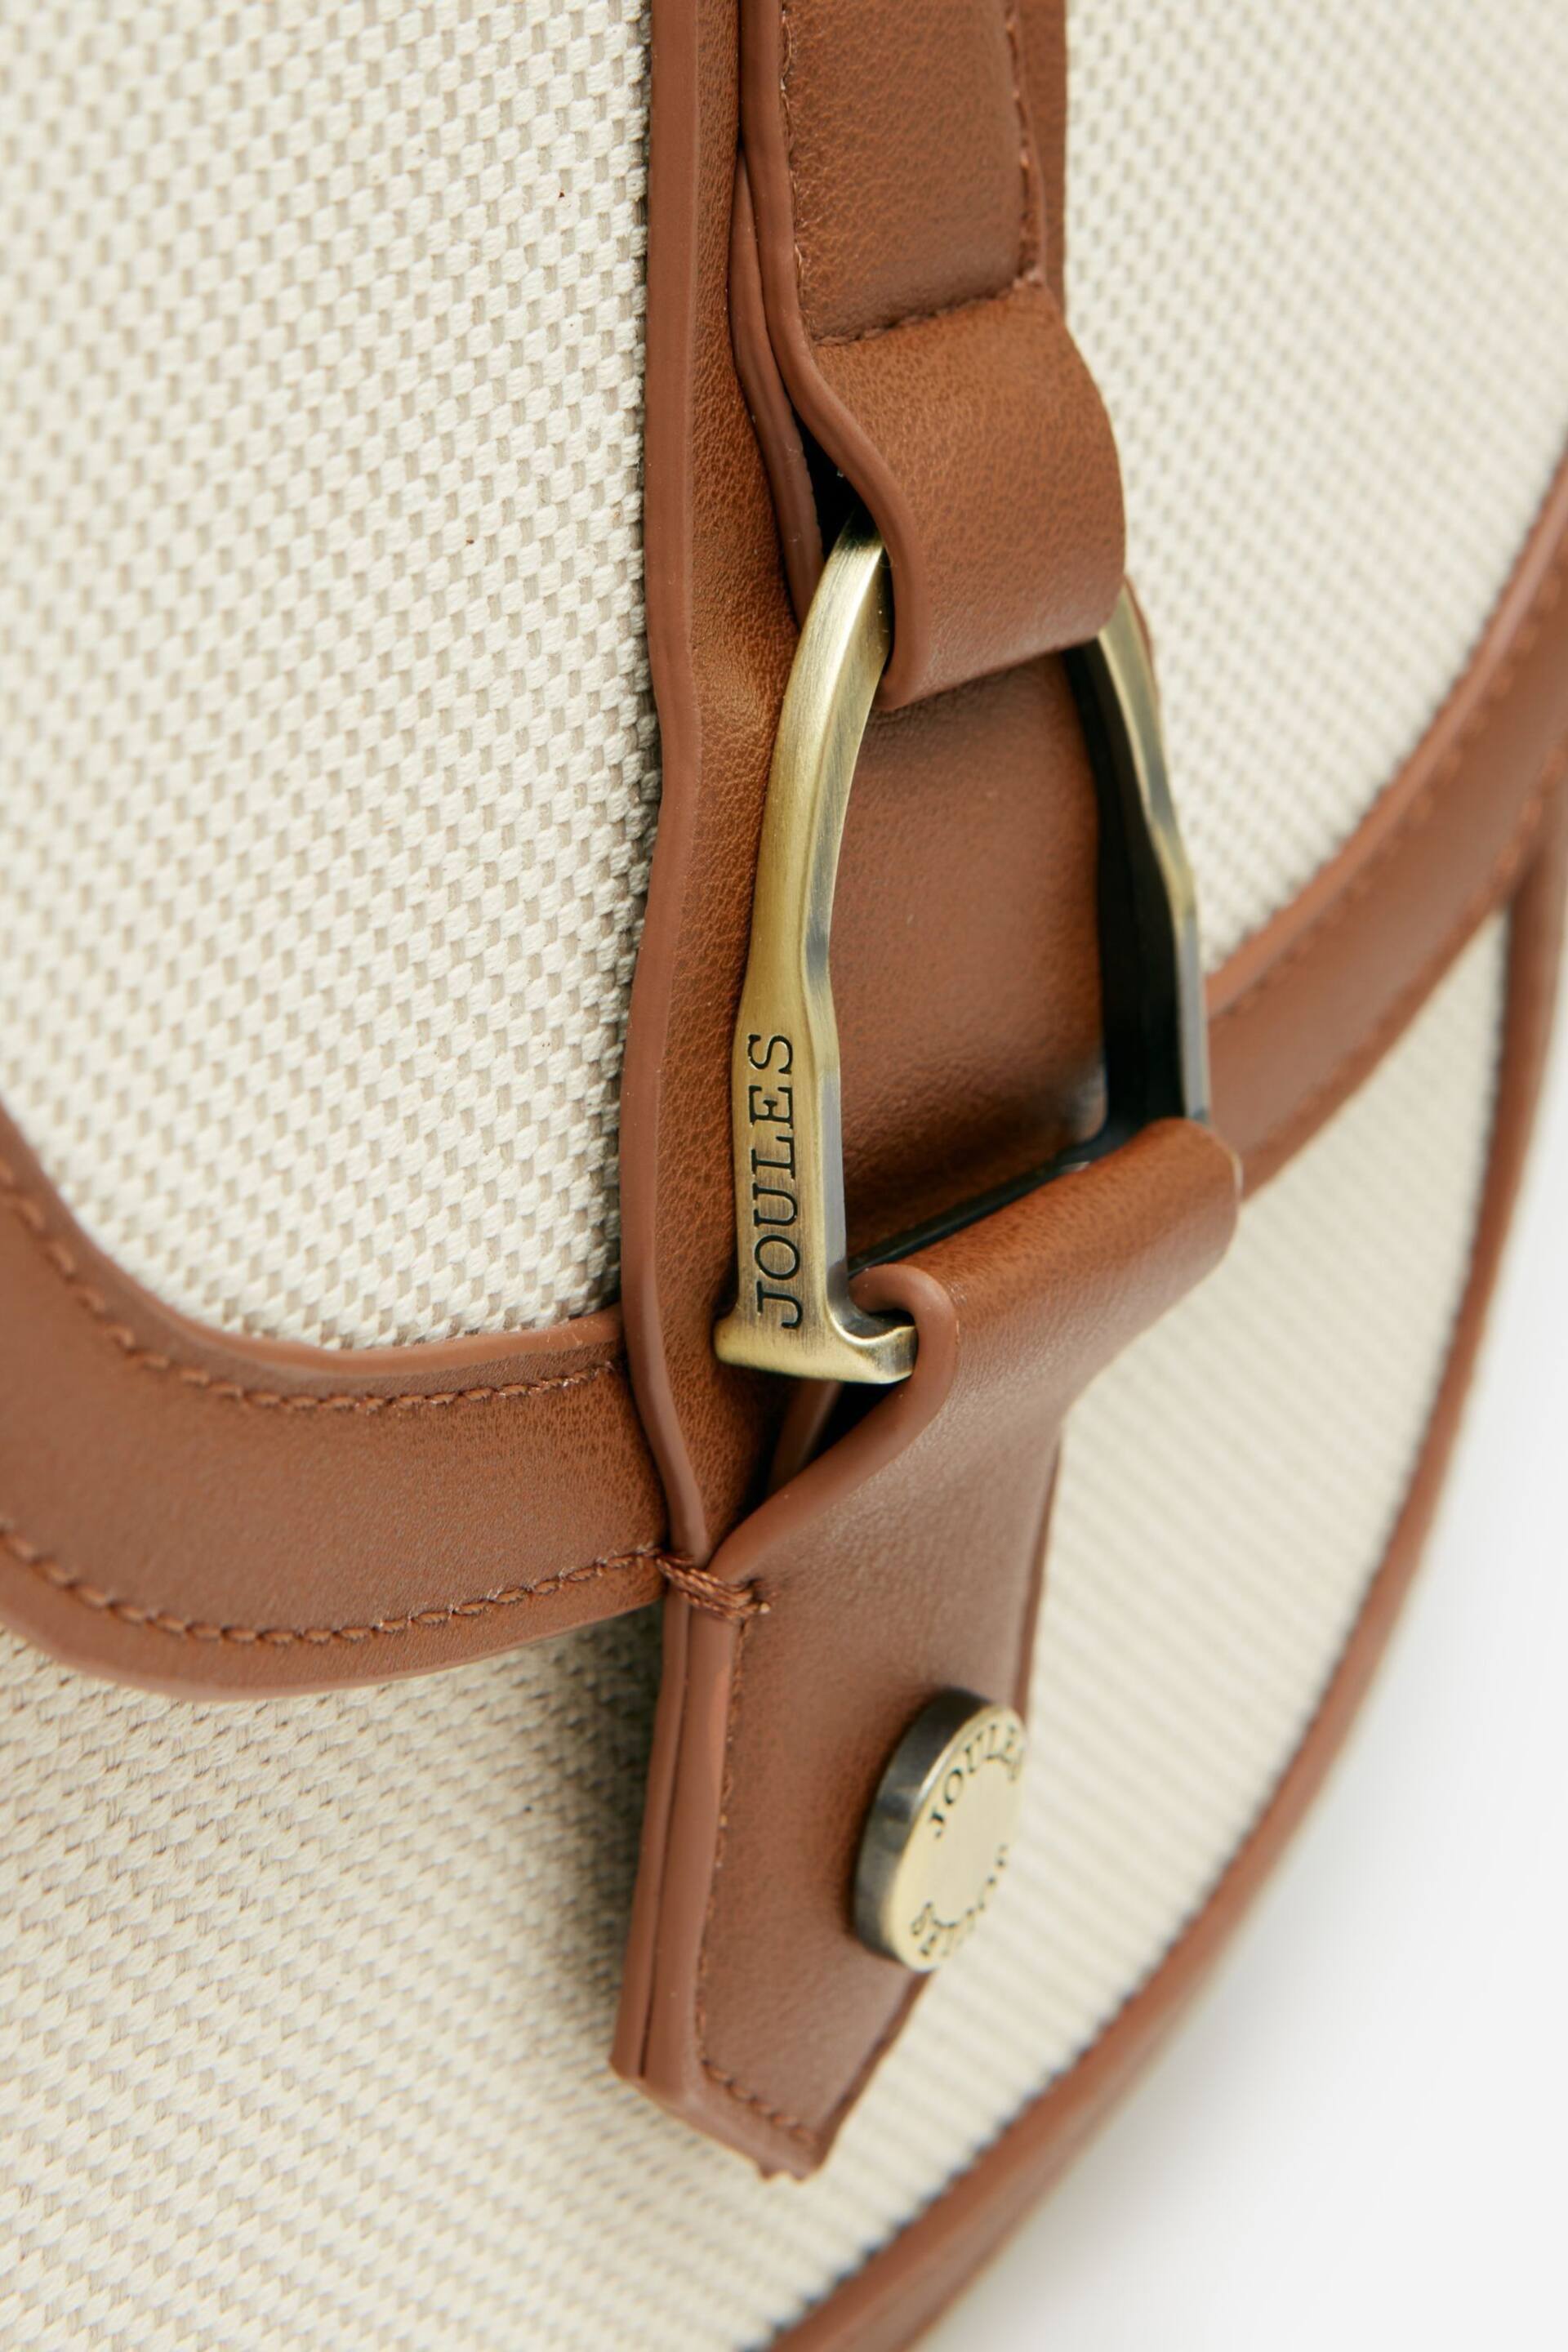 Joules Ludlow Tan Canvas Cross Body Bag - Image 8 of 9